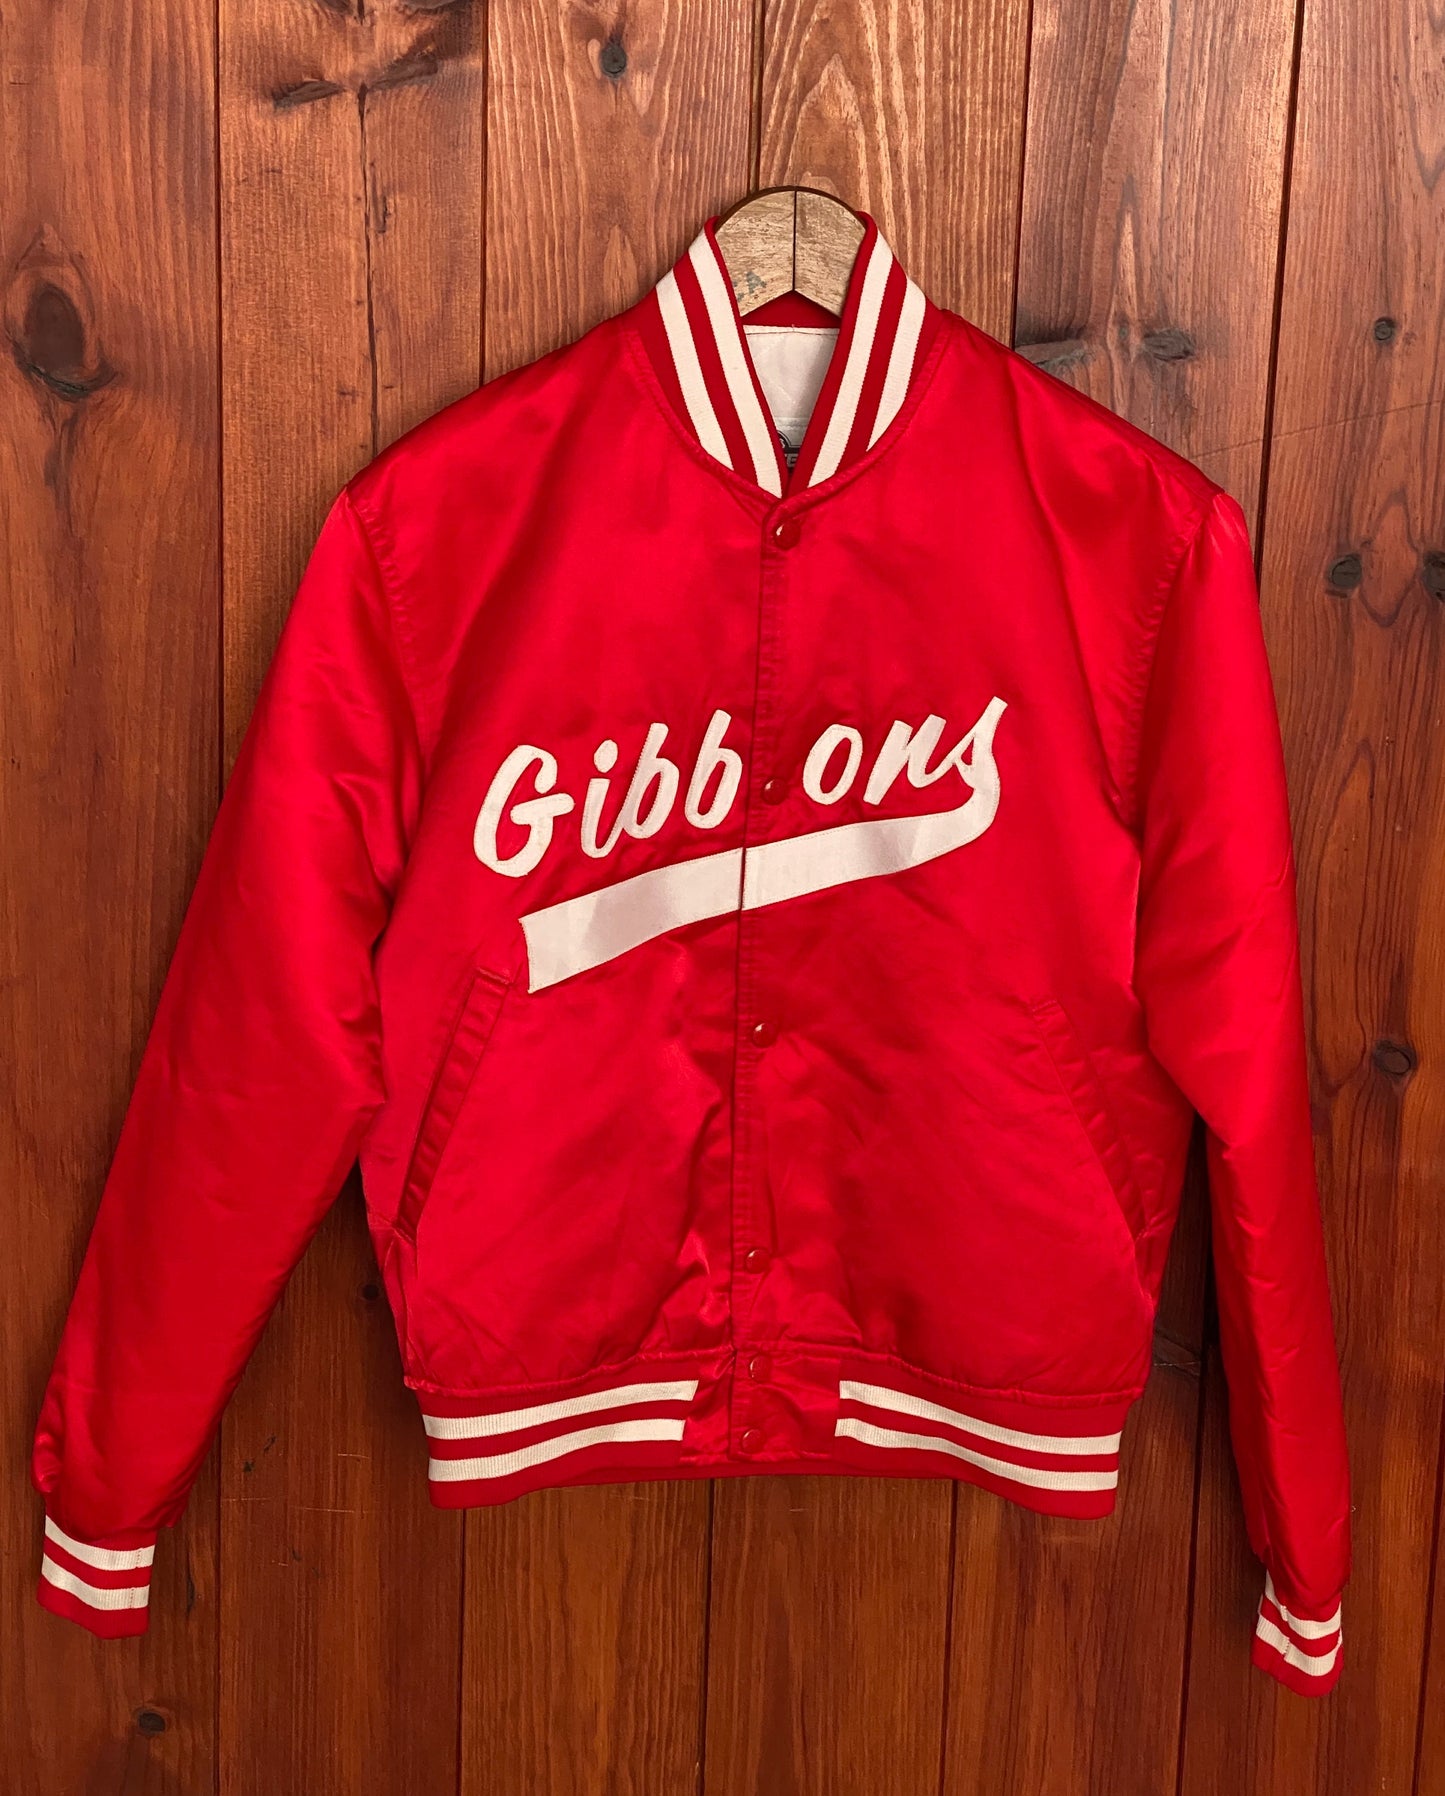 Medium Size Rare Vintage 80s Gibbons Starter Jacket, Made in USA - Classic Collectible